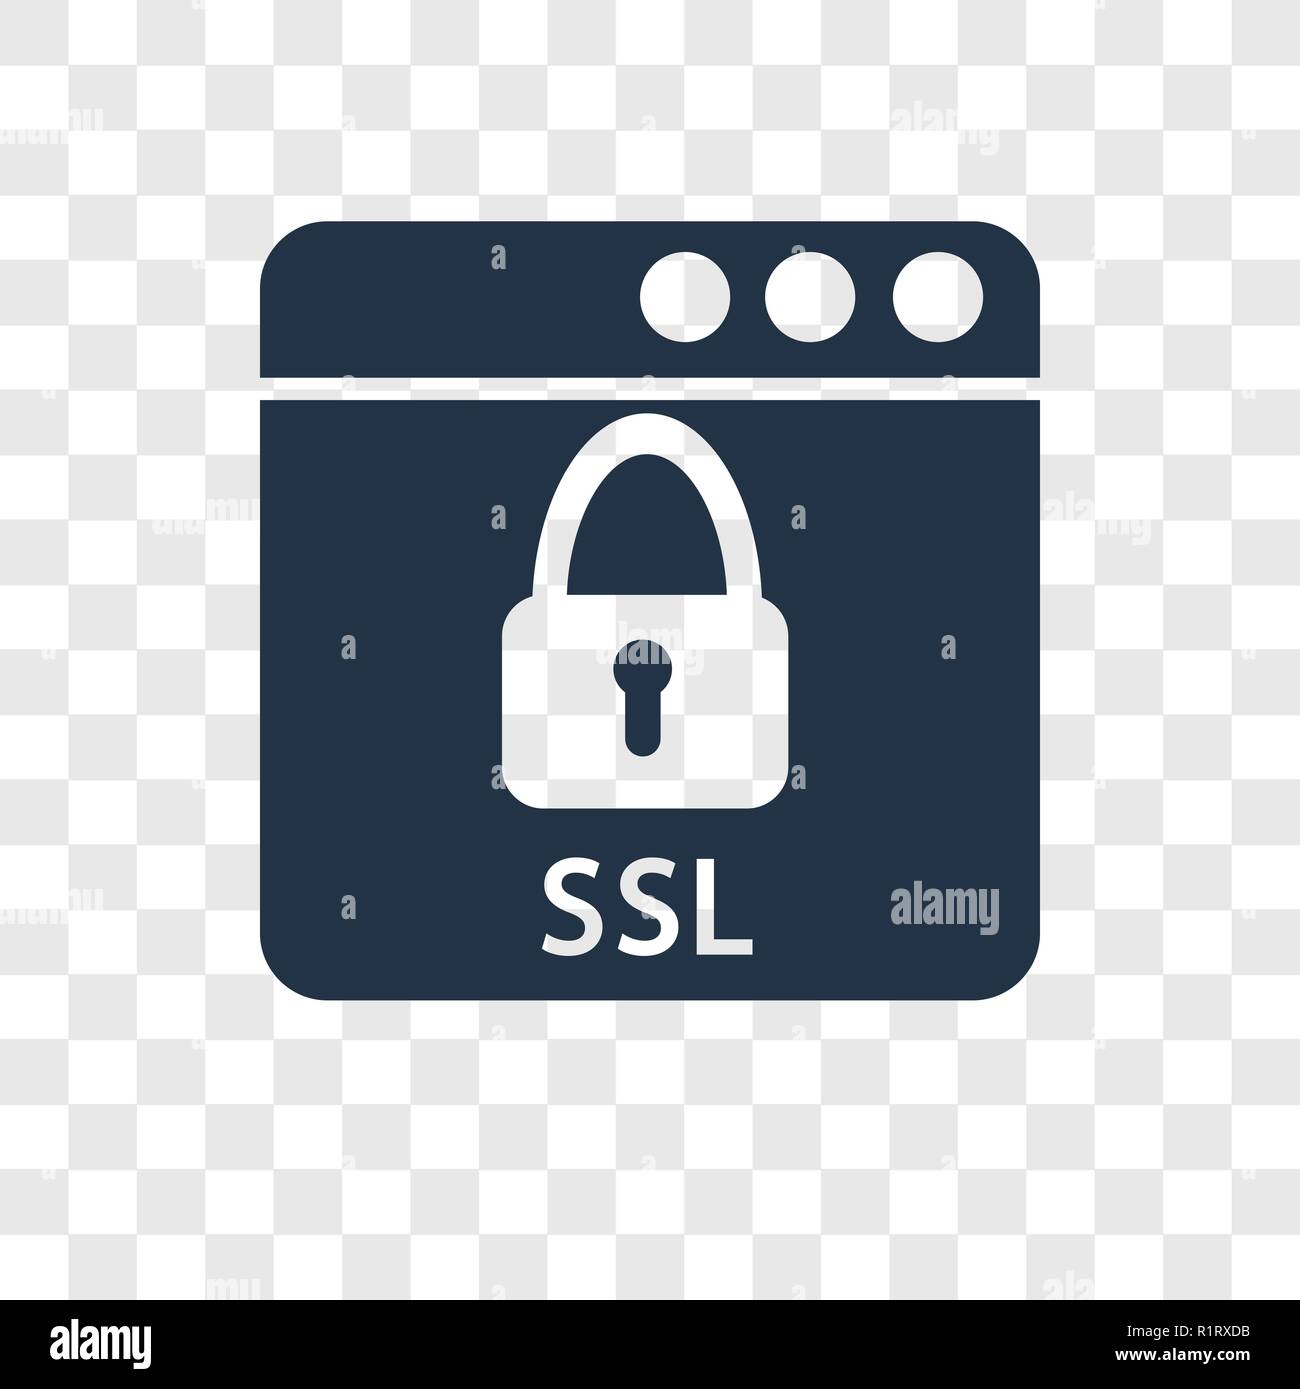 Ssl vector icon isolated on transparent background, Ssl transparency logo concept Stock Vector